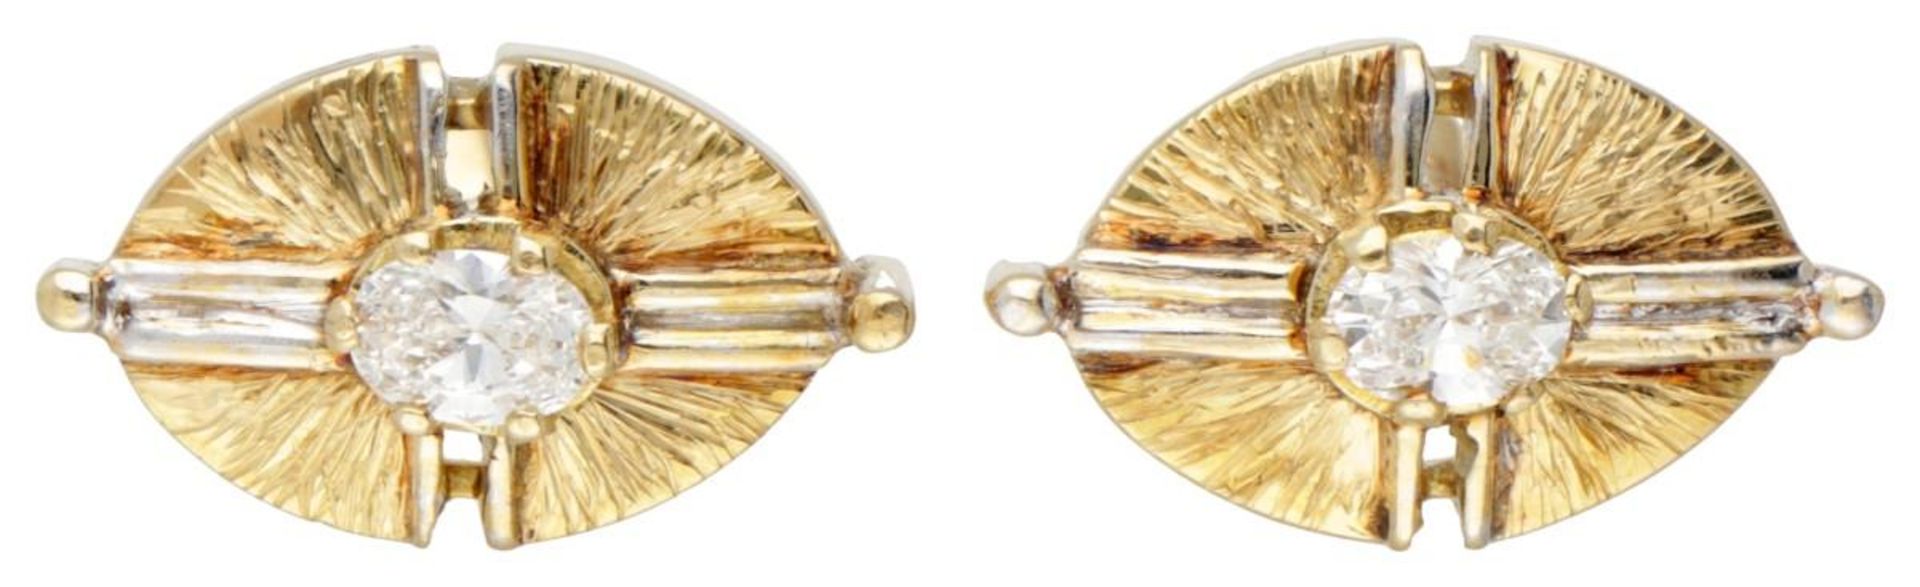 14K. Bicolor gold cufflinks set with approx. 0.65 ct. diamond. - Image 4 of 6